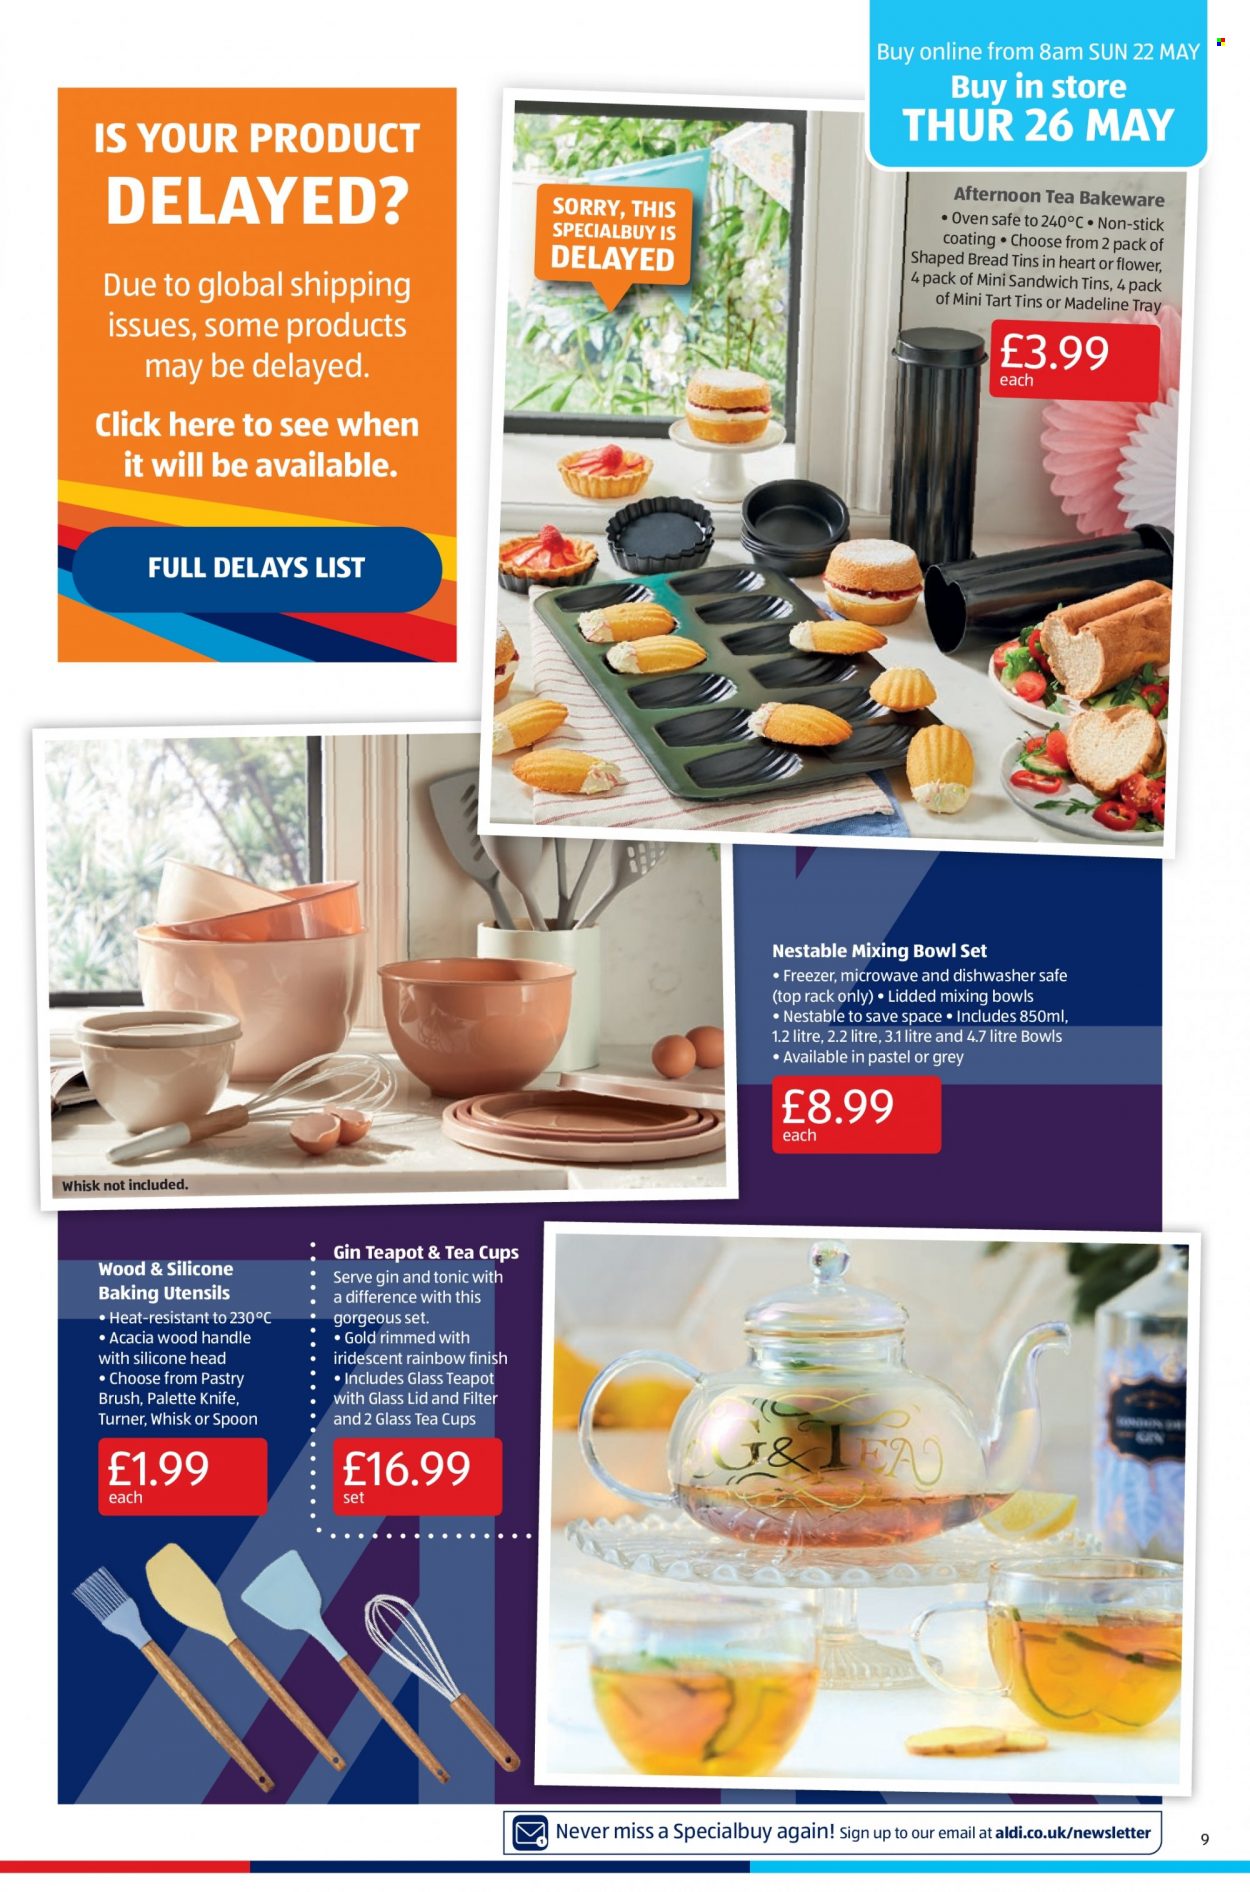 thumbnail - Aldi offer  - 22/05/2022 - 29/05/2022 - Sales products - bread, tart, sandwich, gin, gin & tonic, Palette, knife, lid, spoon, teapot, utensils, cup, bowl set, bakeware, oven, microwave. Page 9.